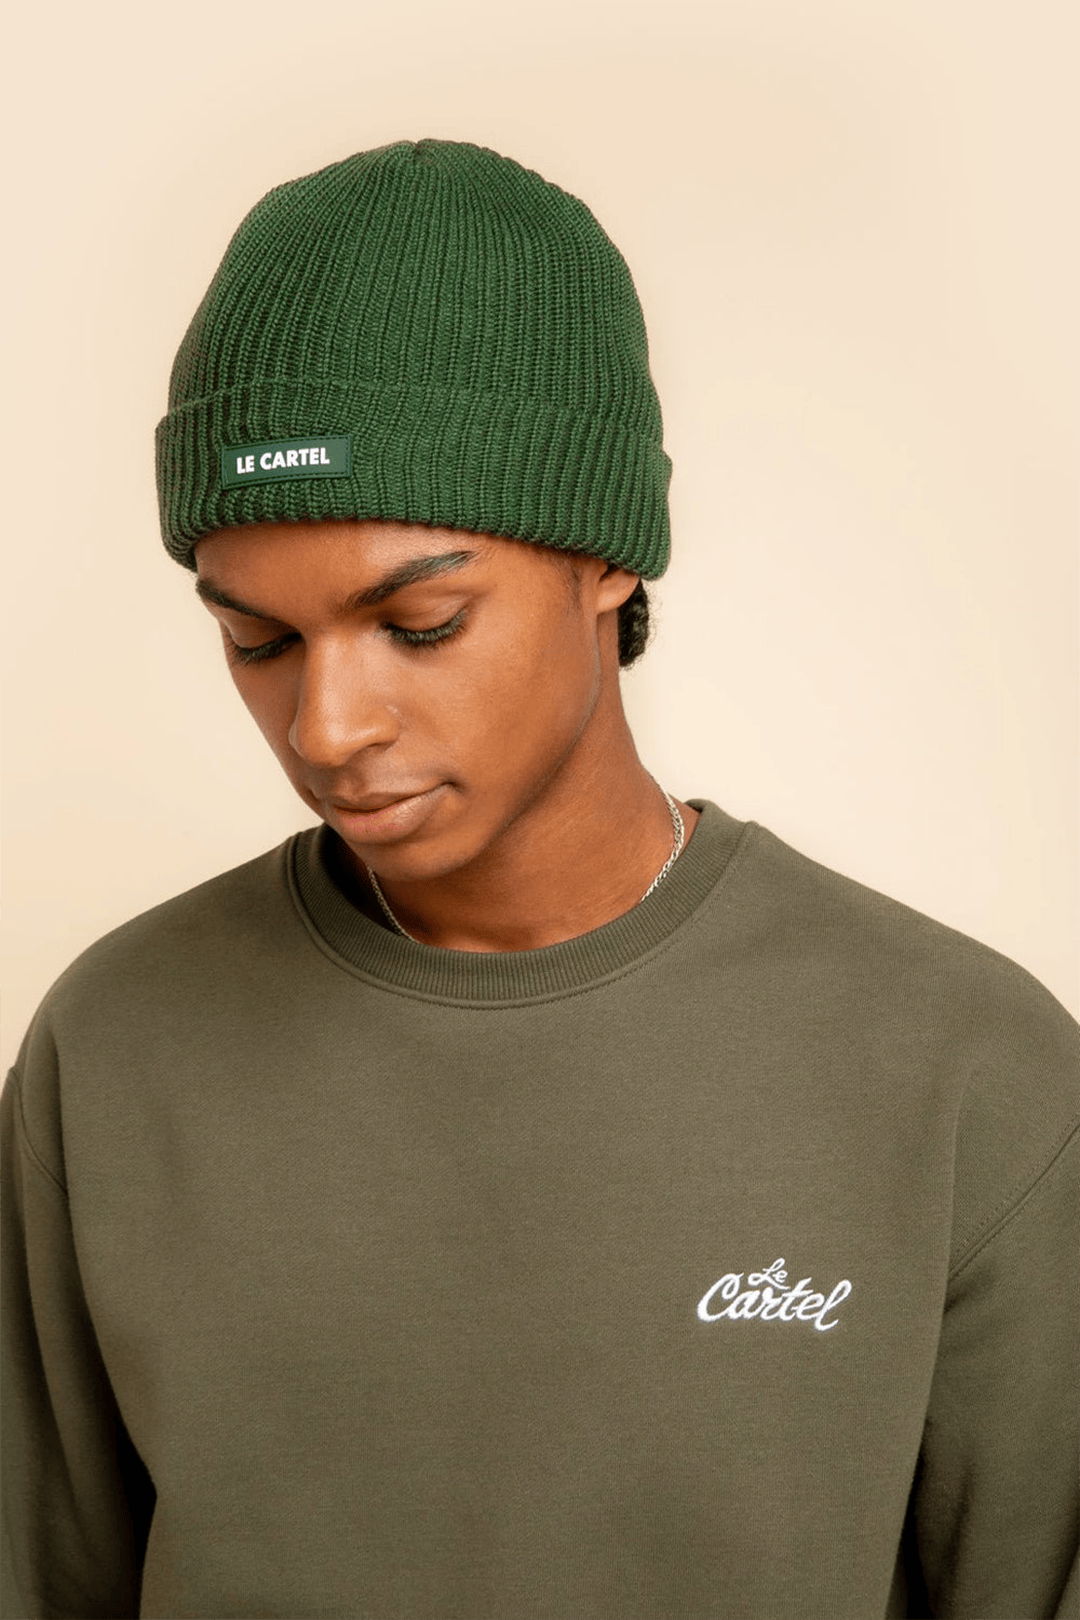 CHUNKY・Tuque grosse maille・Vert forêt